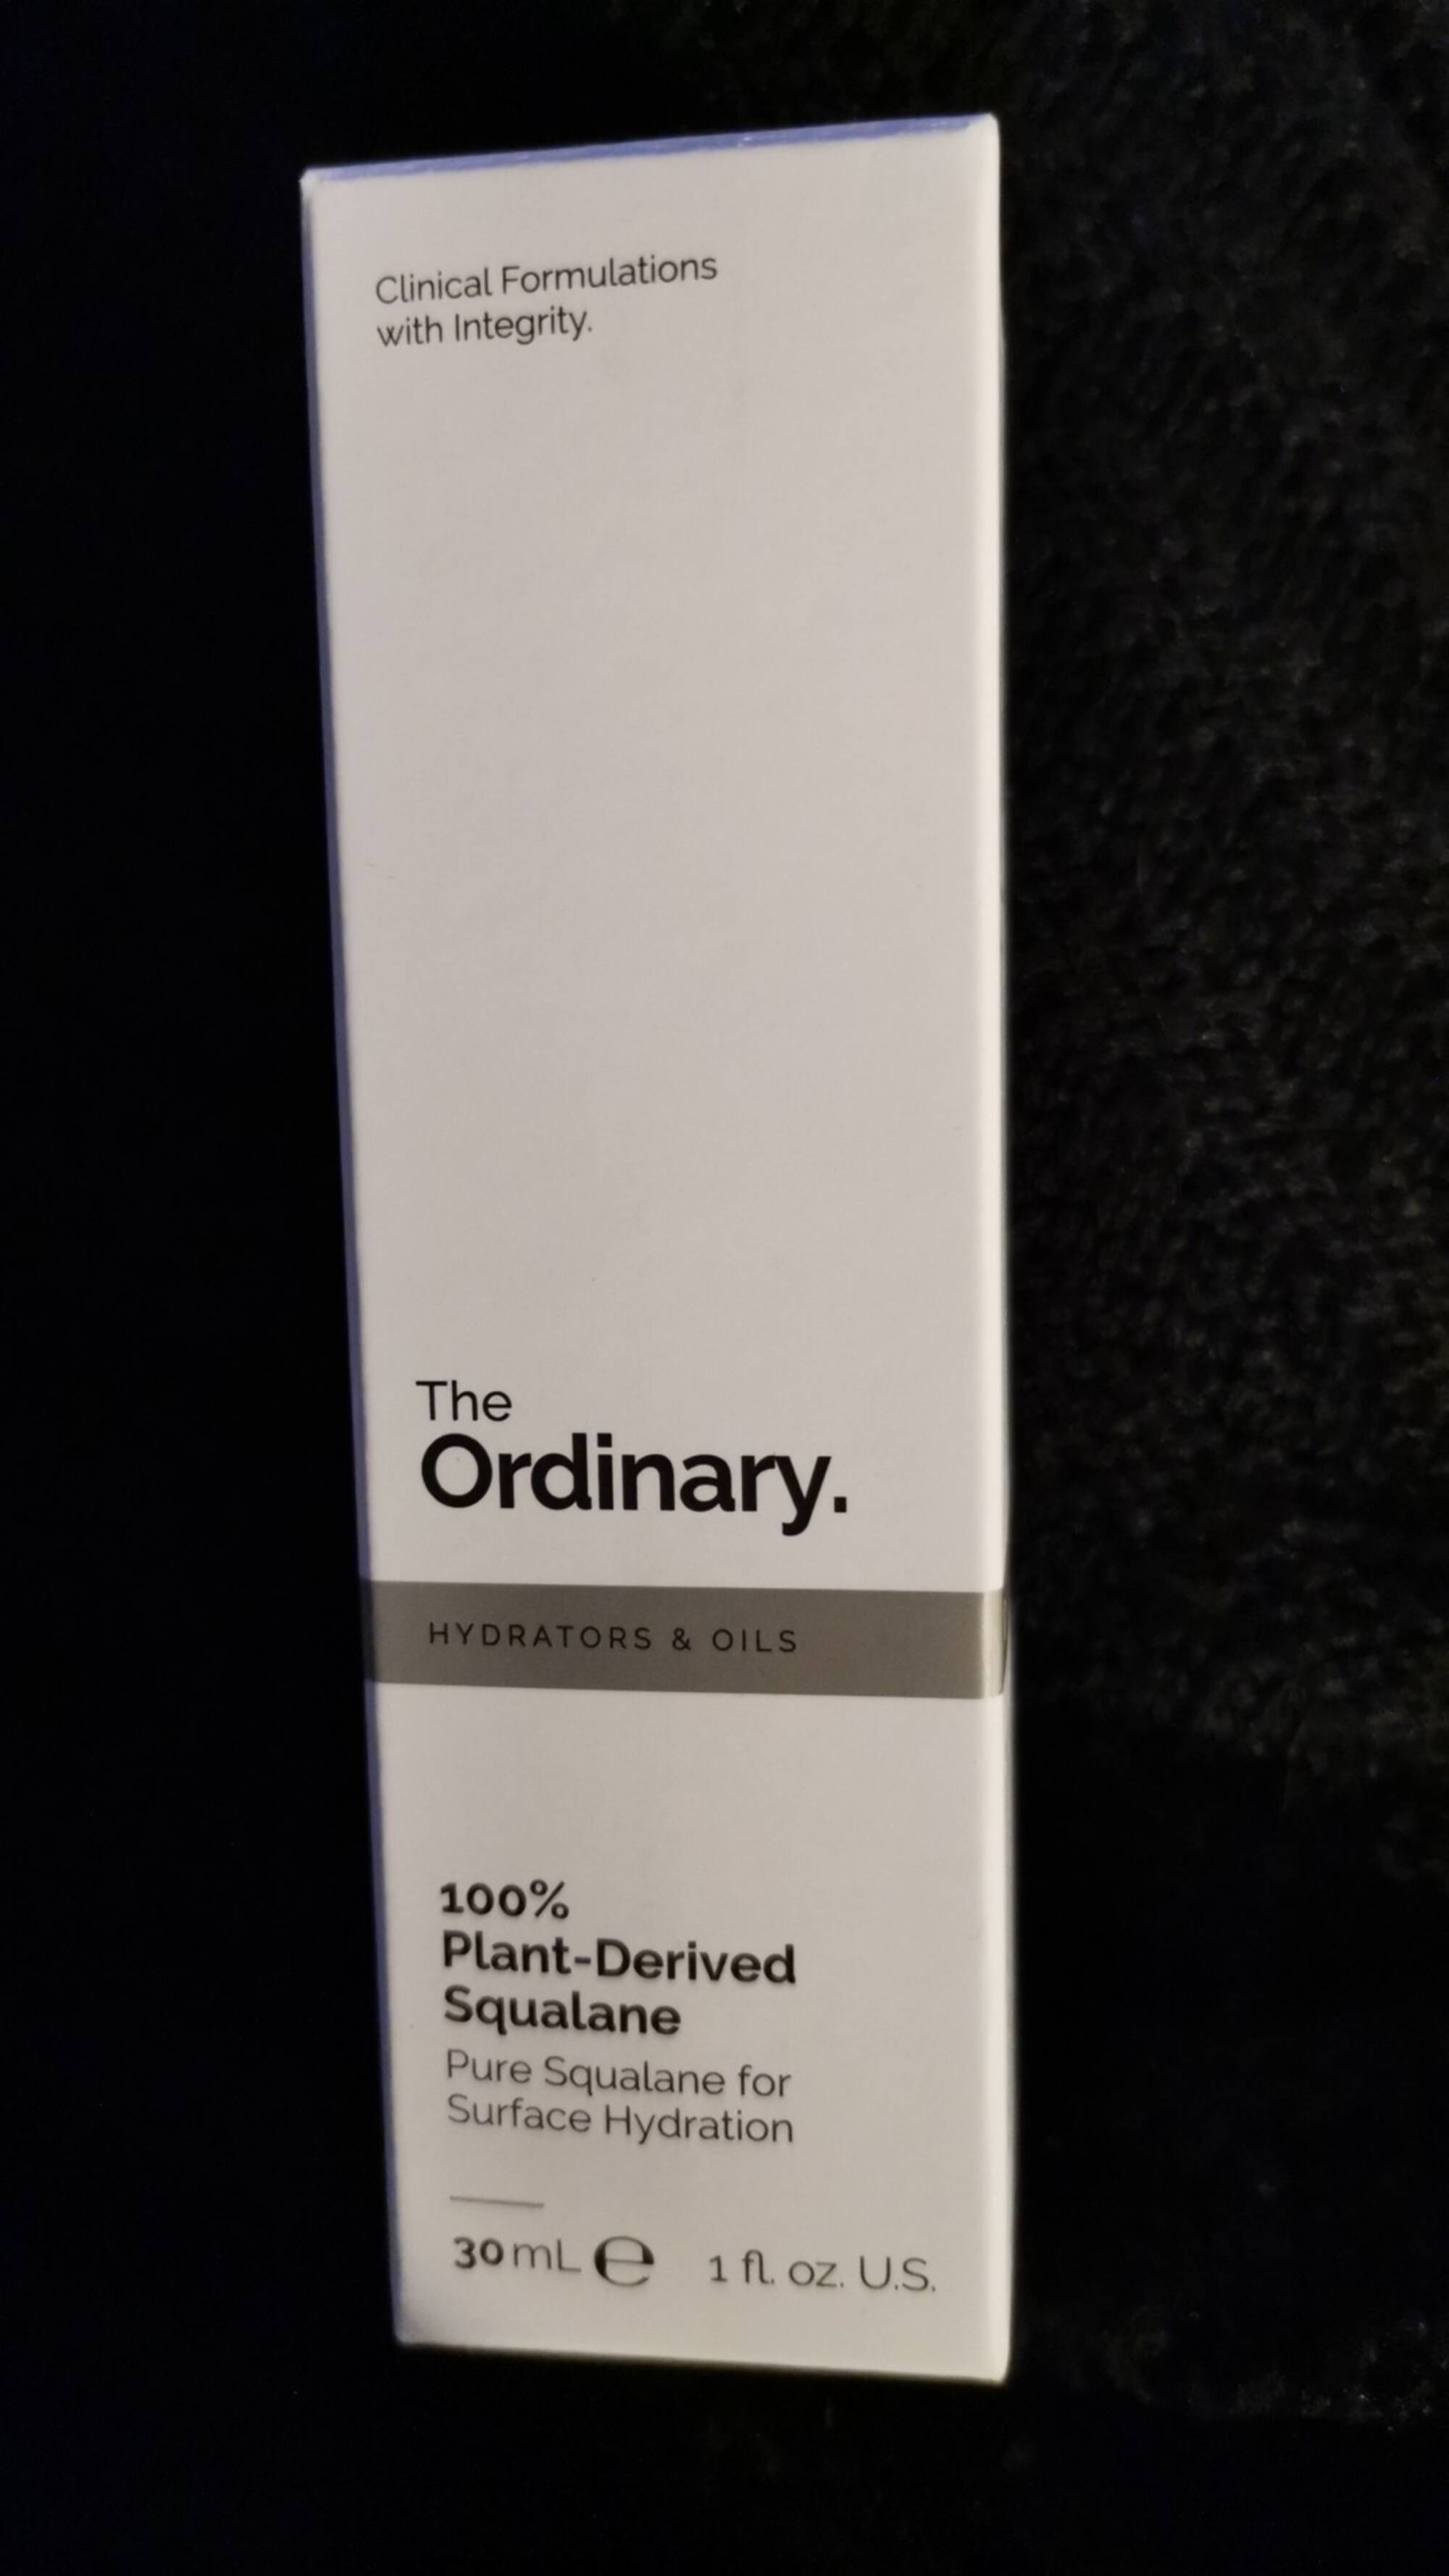 THE ORDINARY - Pure squalane for surface hydration